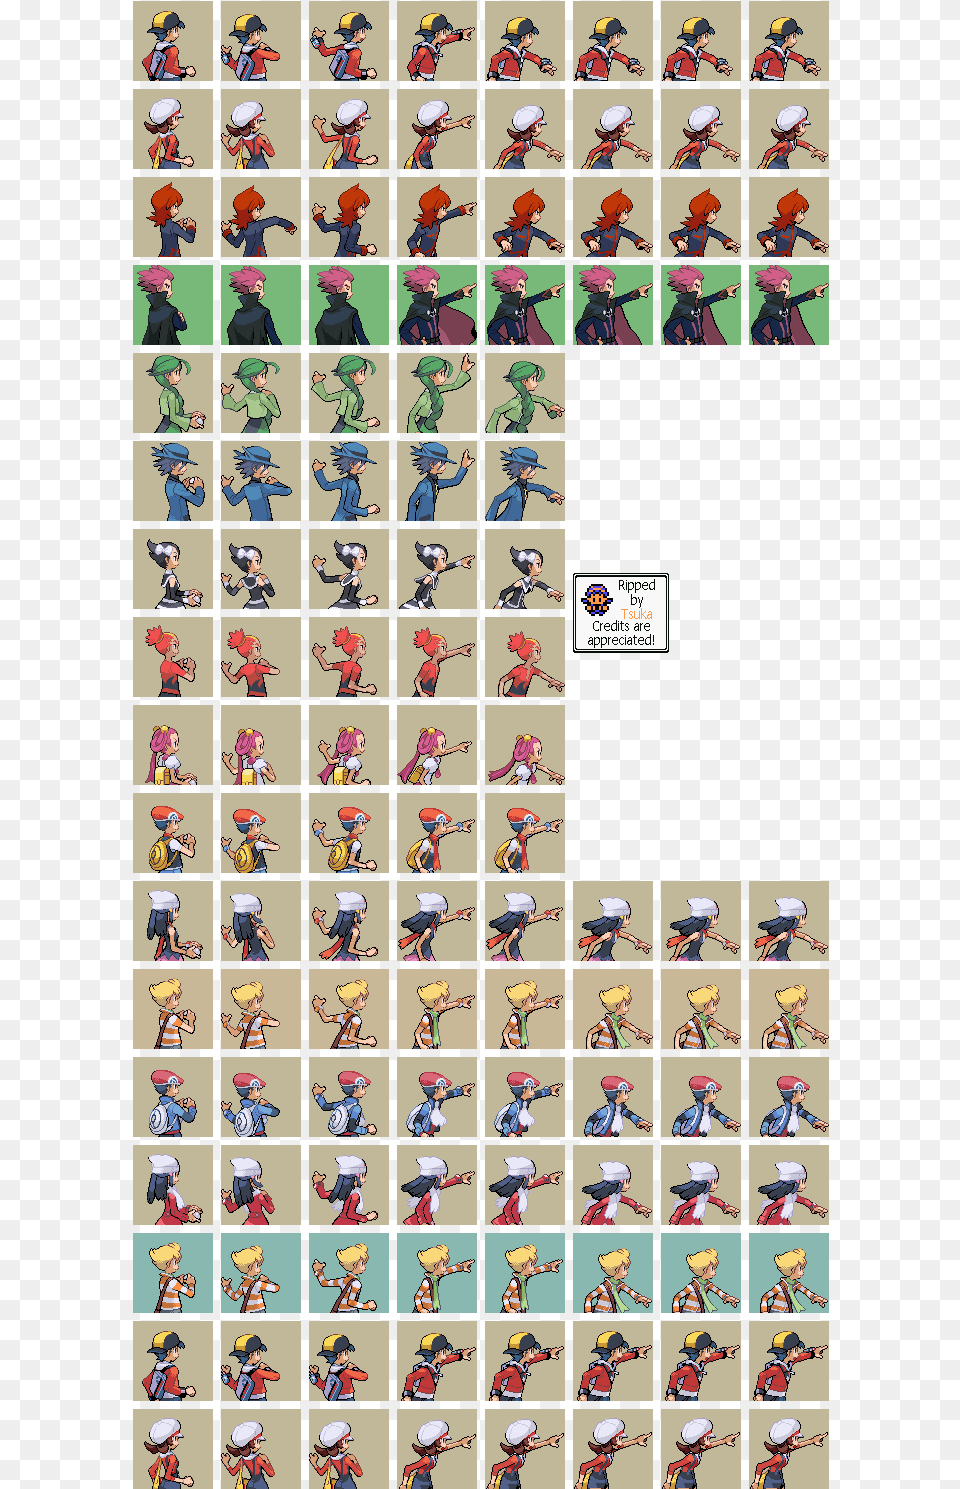 Trainers Backs Pokemon Gba Trainer Sprites, Book, Comics, Publication, Person Free Png